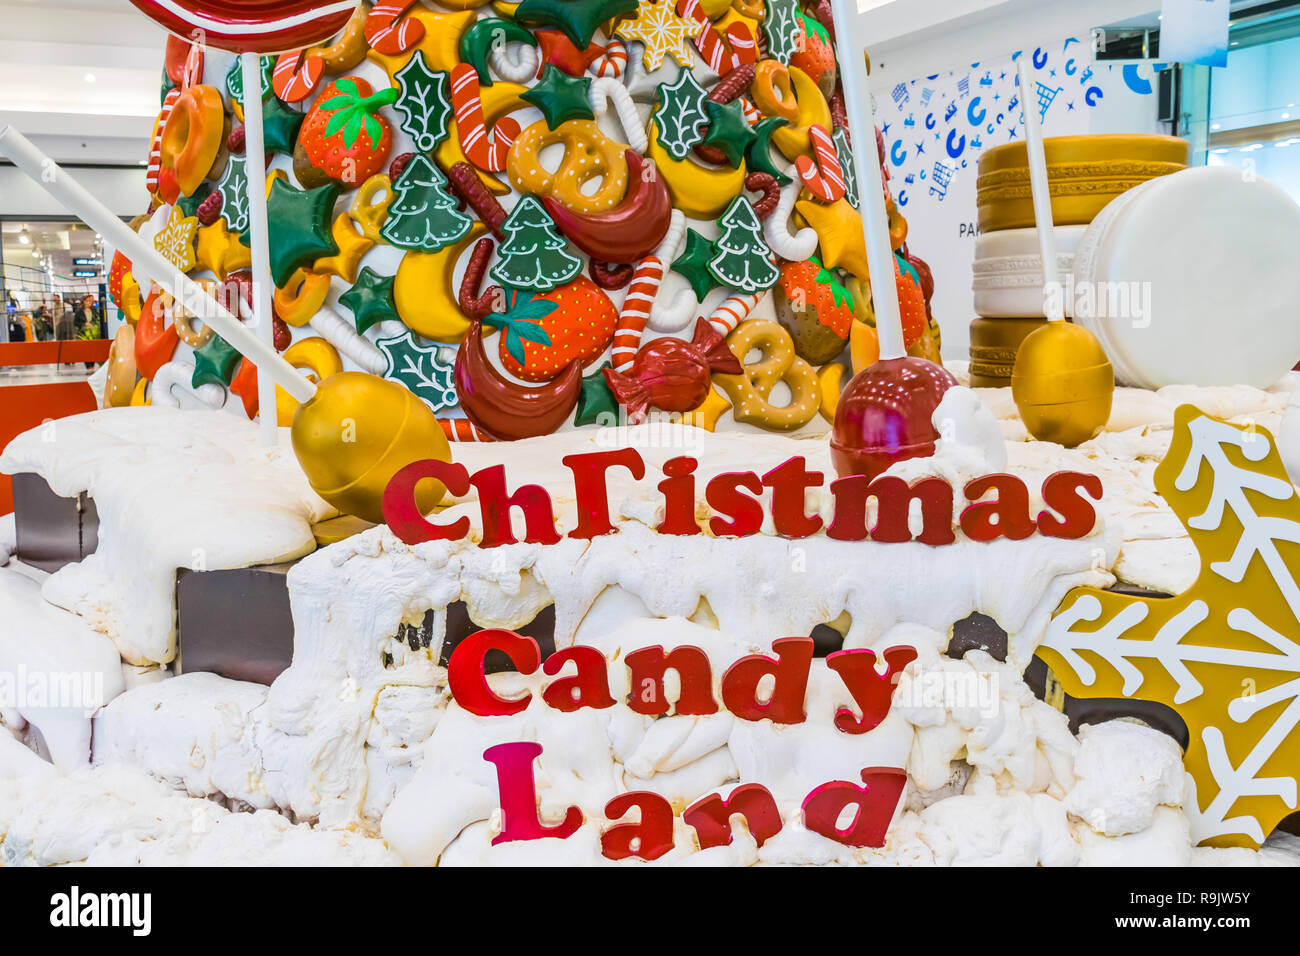 Christmas candy , snow , lollipop and colors Stock Photo